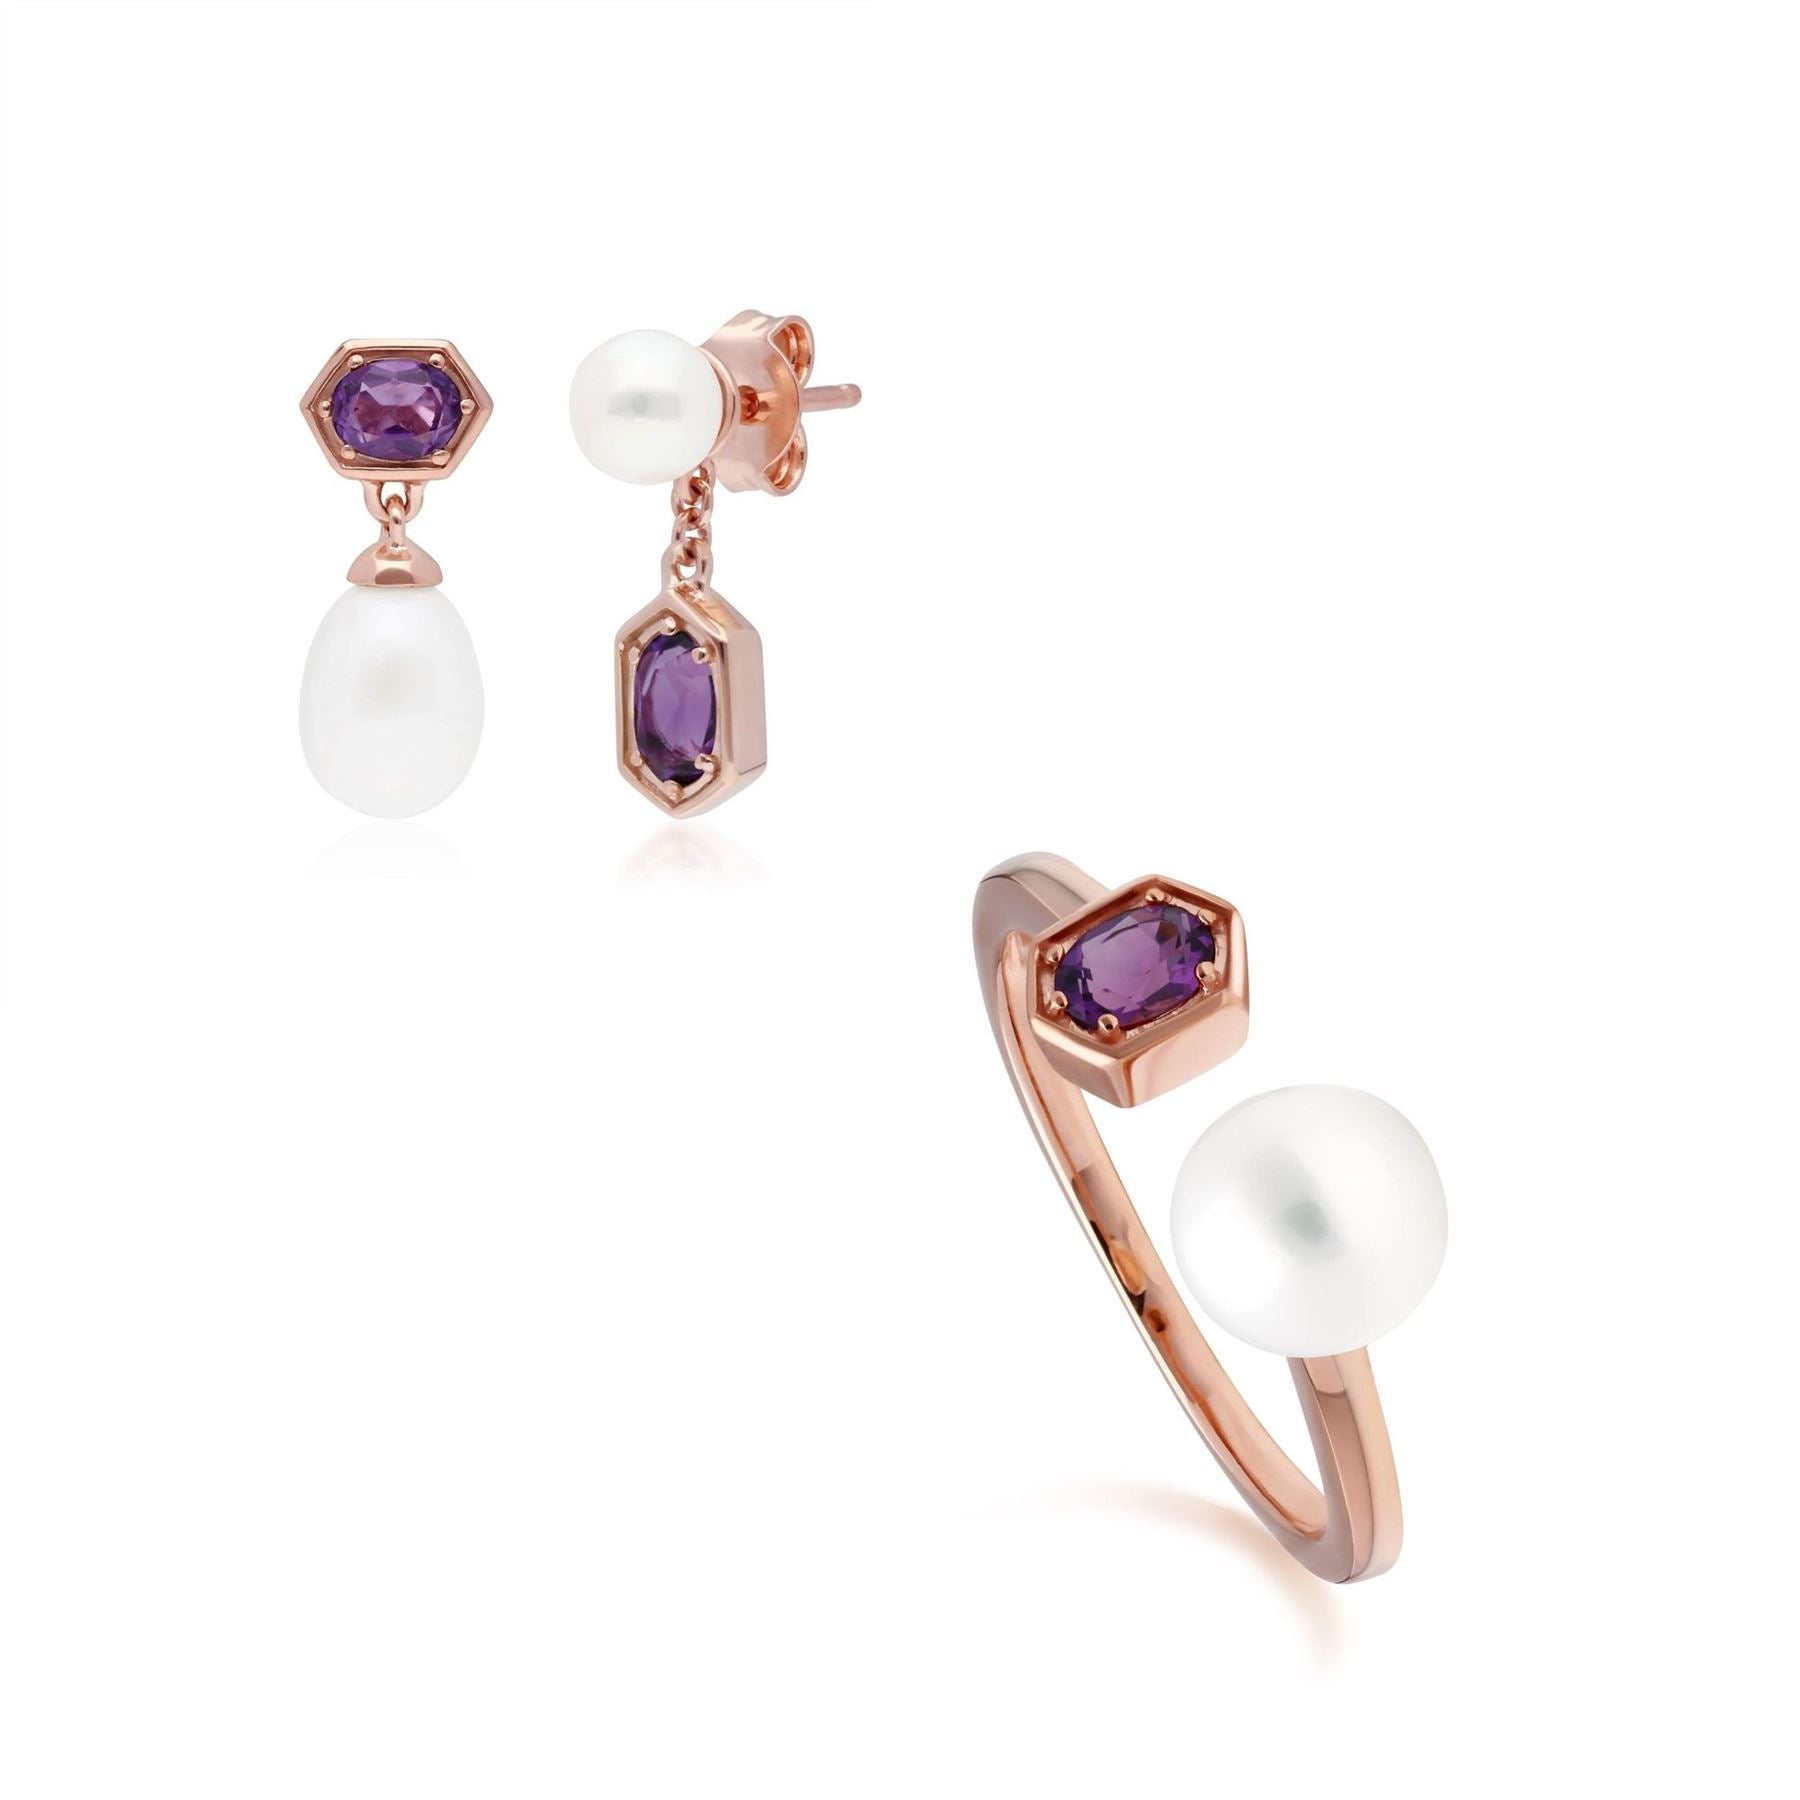 Modern Pearl & Amethyst Earring & Ring Set in Rose Gold Plated Sterling Silver